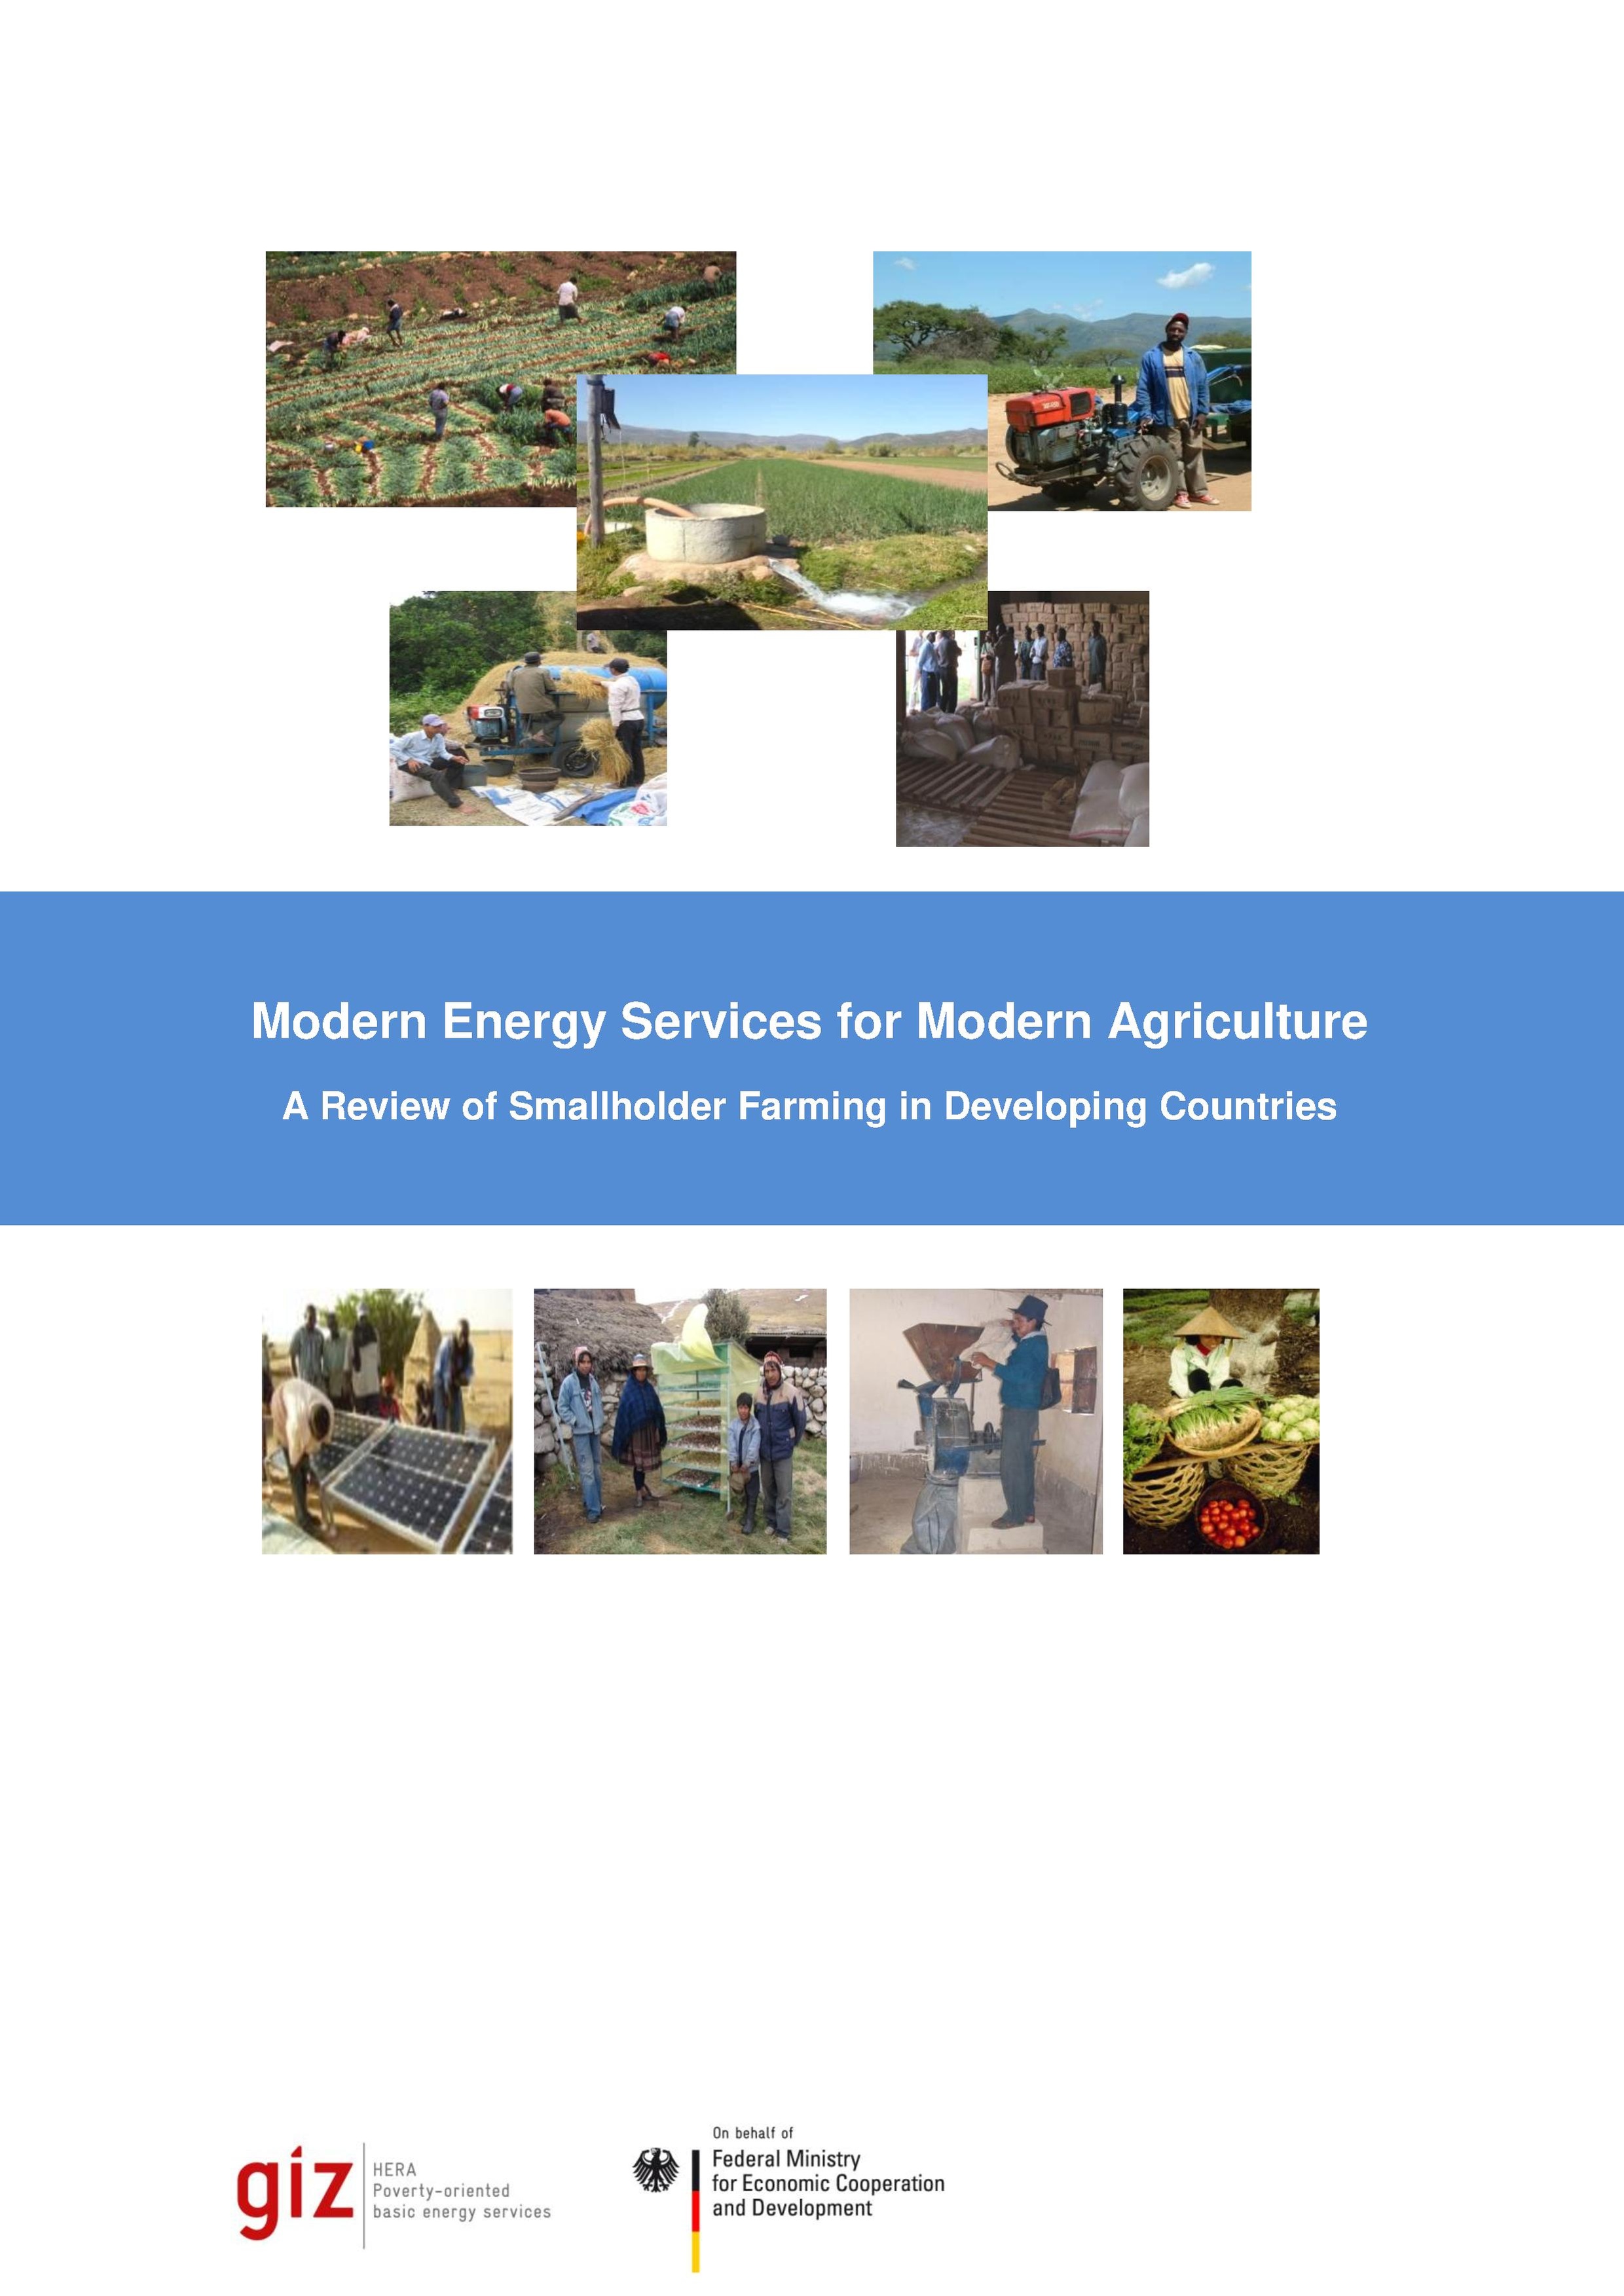 Energy Services for Modern Agriculture